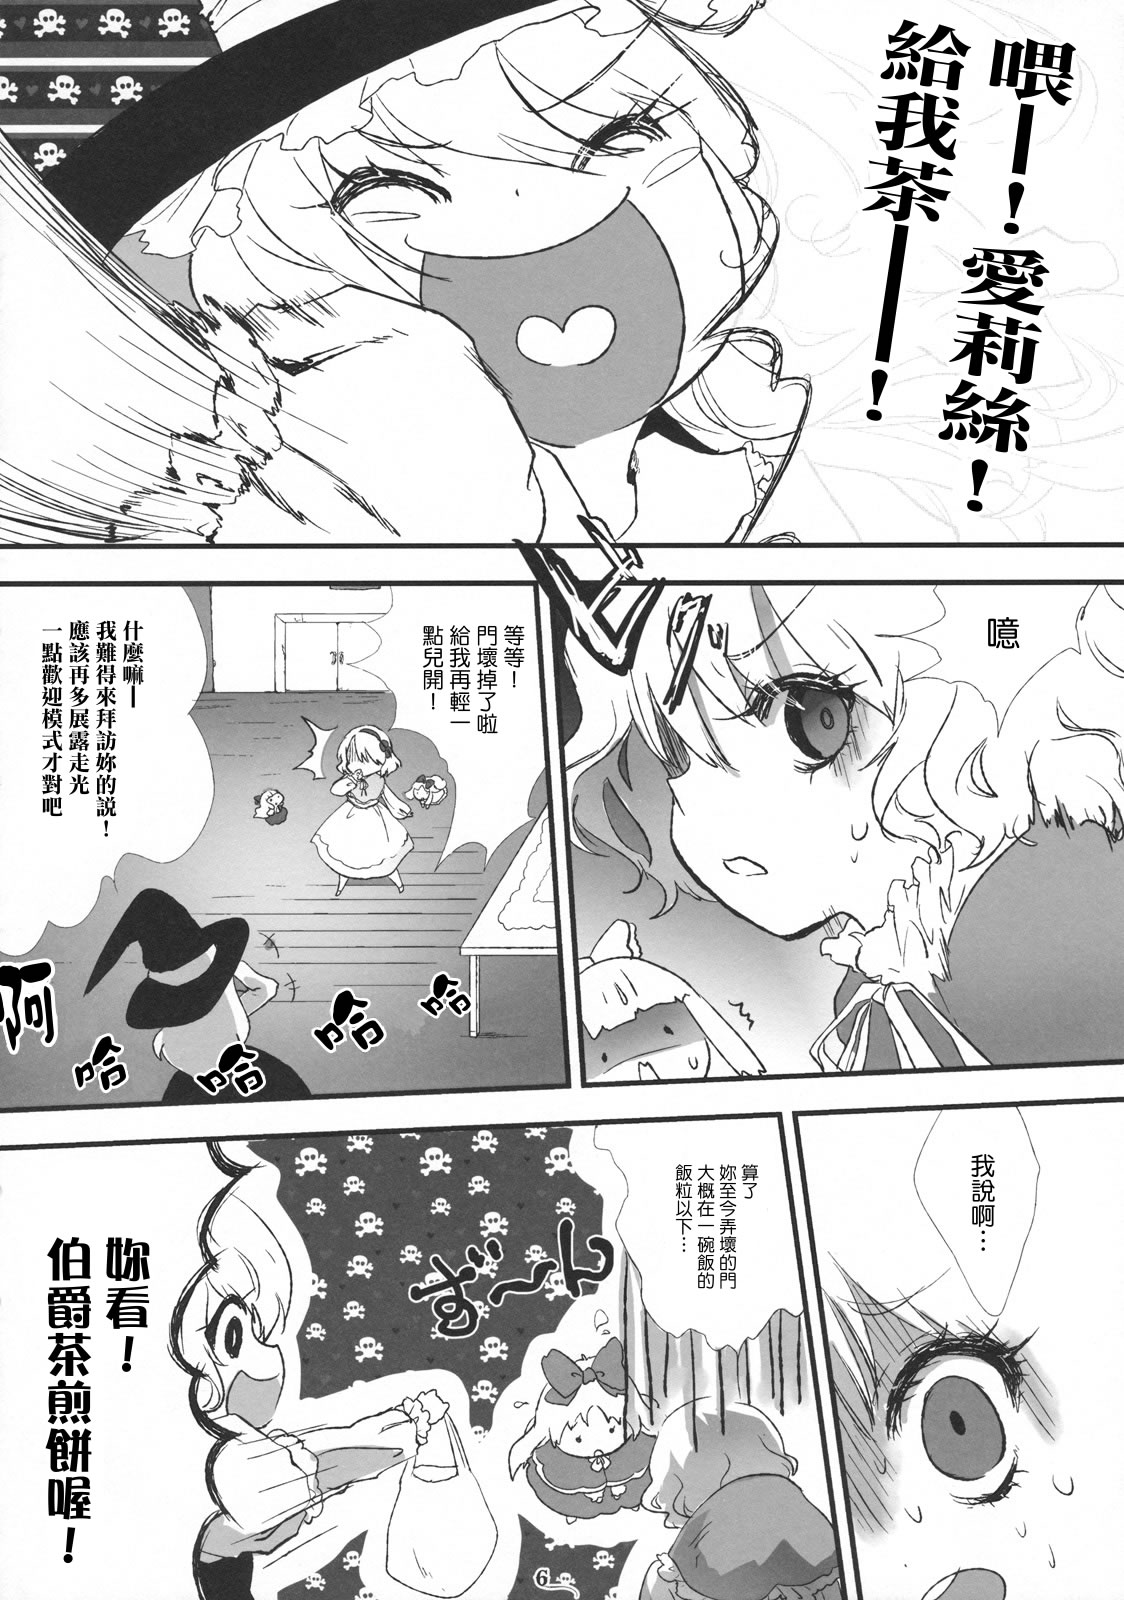 (C79) [Chaotic Wolf (Inuboe)] FILTH IN THE ENVY (Touhou Project) [Chinese] [Genesis漢化] (C79) (同人誌) [Chaotic Wolf (狗吠)] FILTH IN THE ENVY (東方) [中国翻訳]